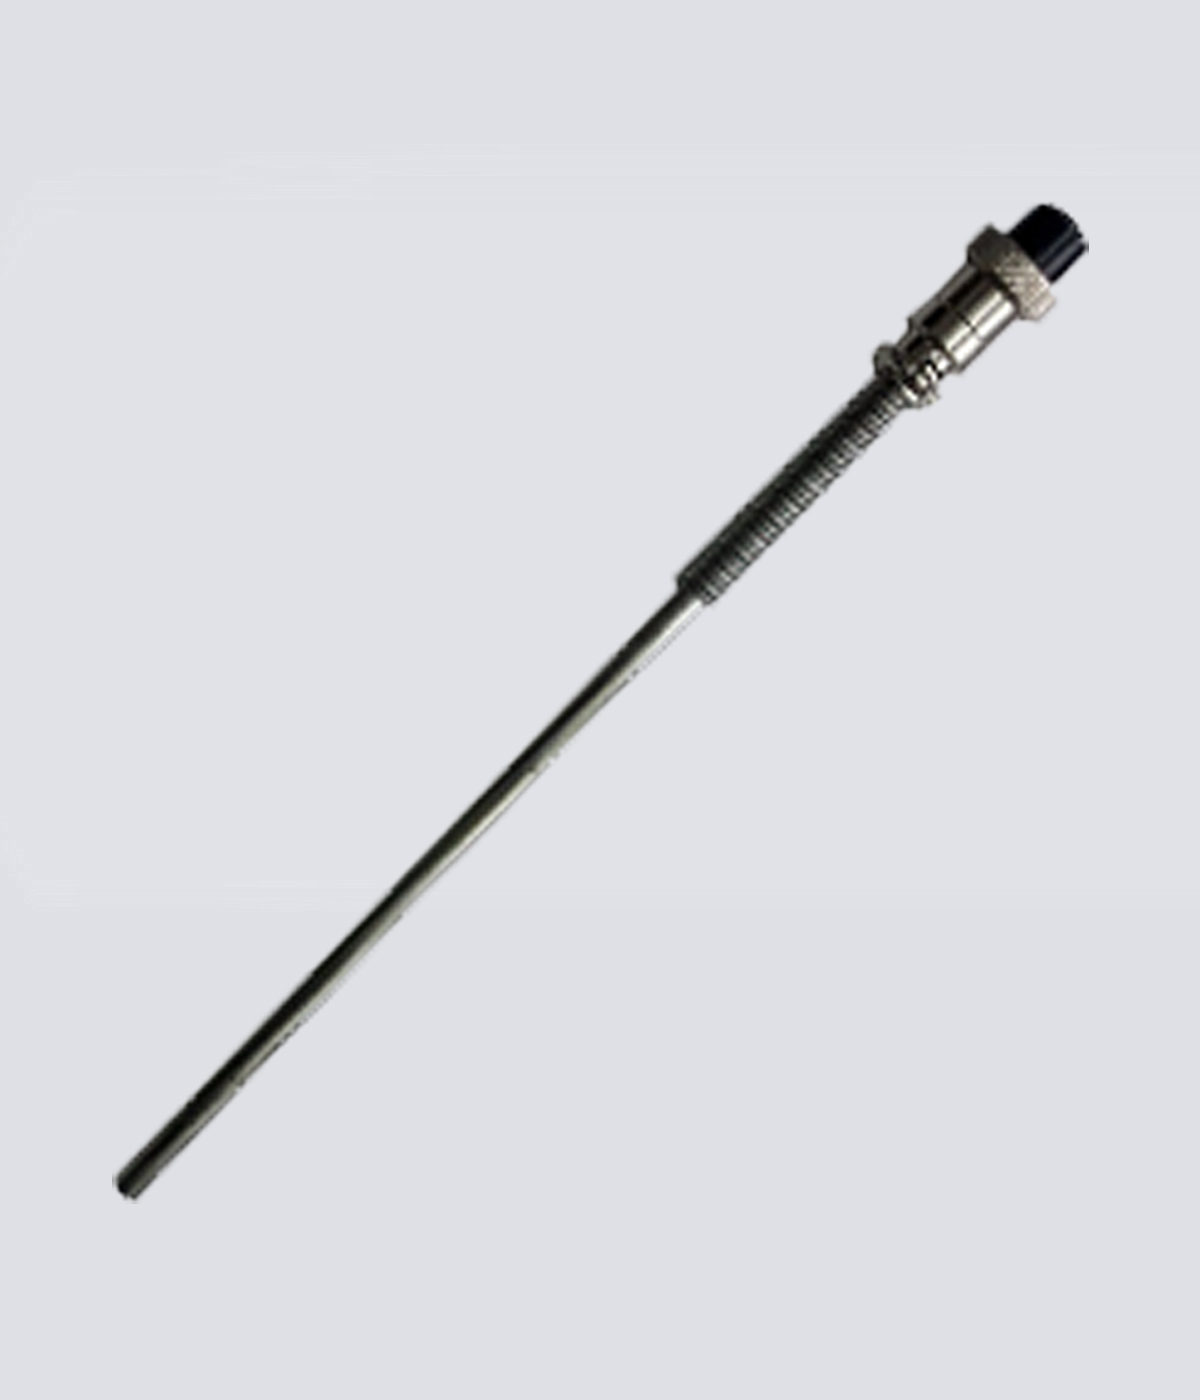 2 Pin Round Connector type Thermocouples